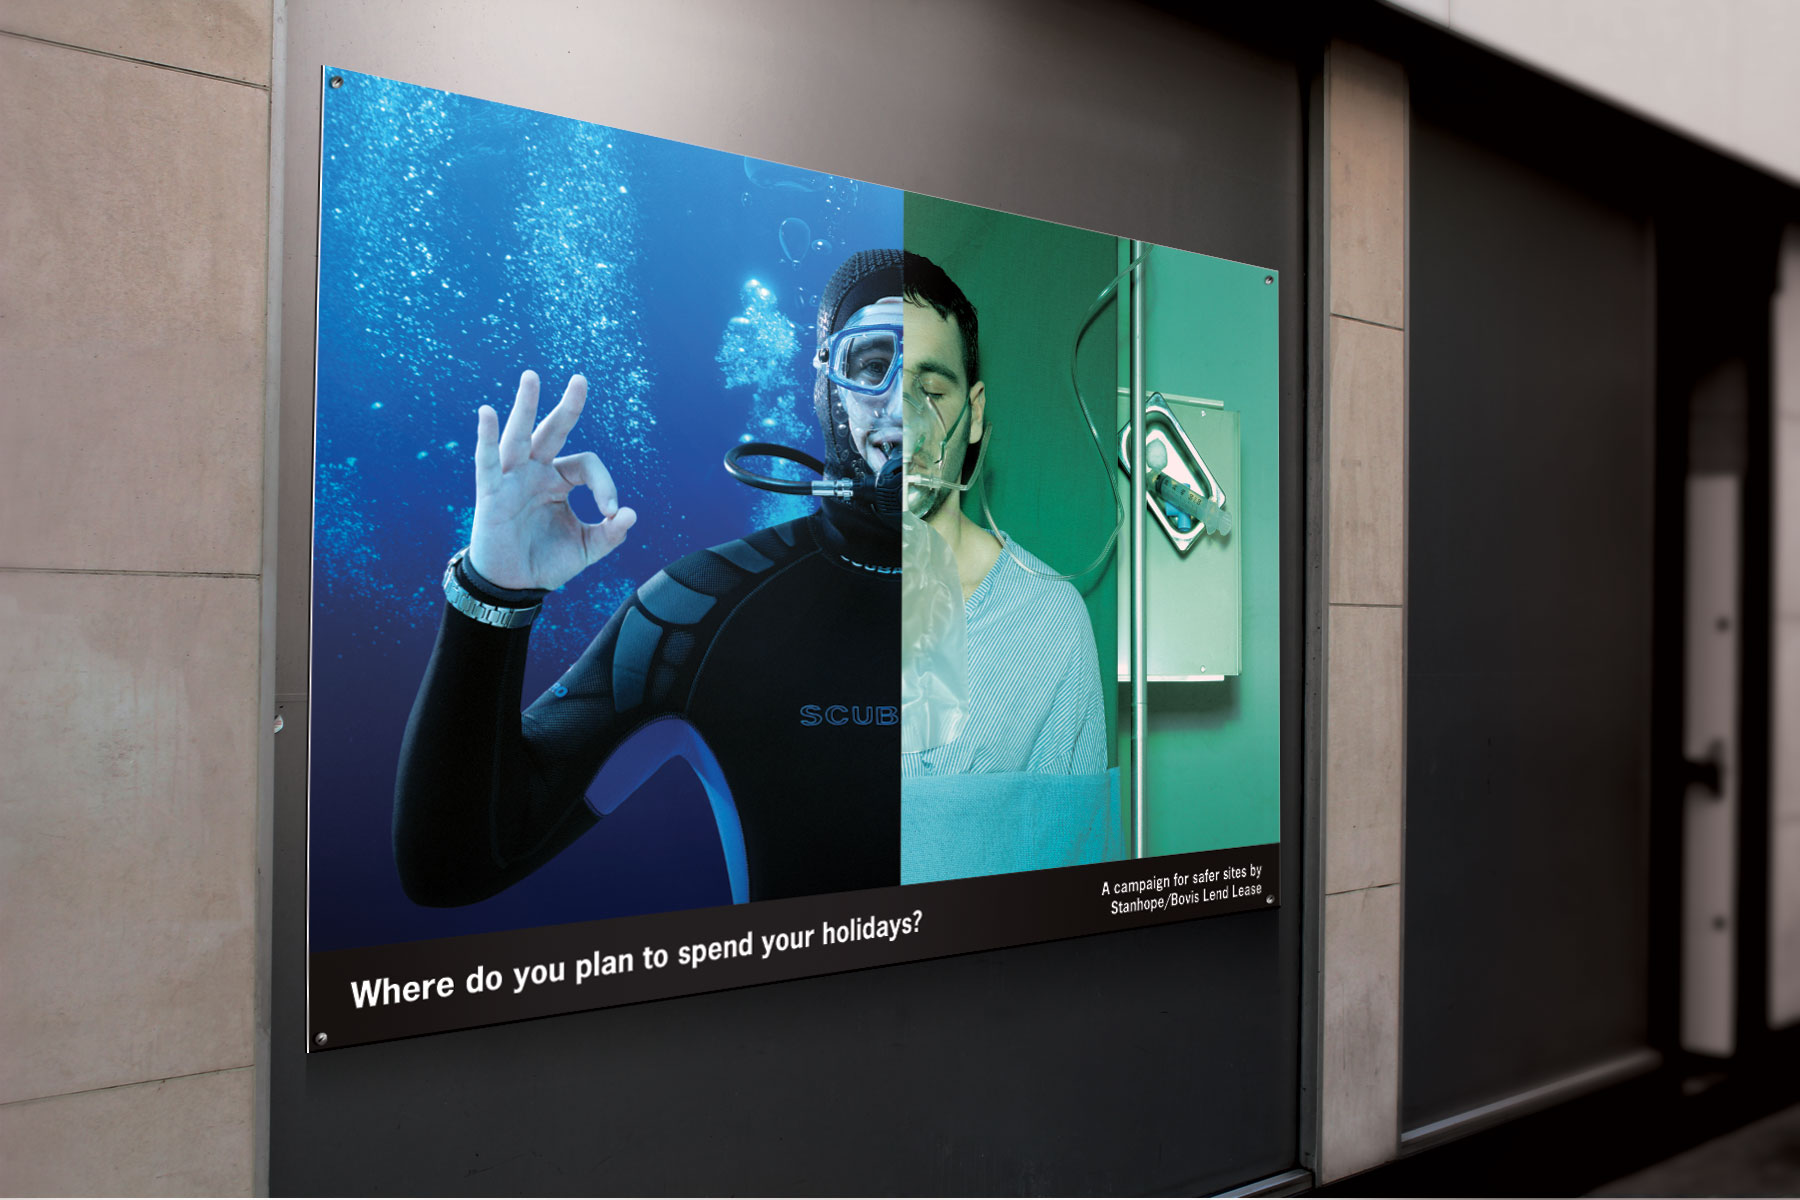 The advertising media was applied to a myriad of applications, from small A2 format block mounted posters in canteens to much larger billboard format.